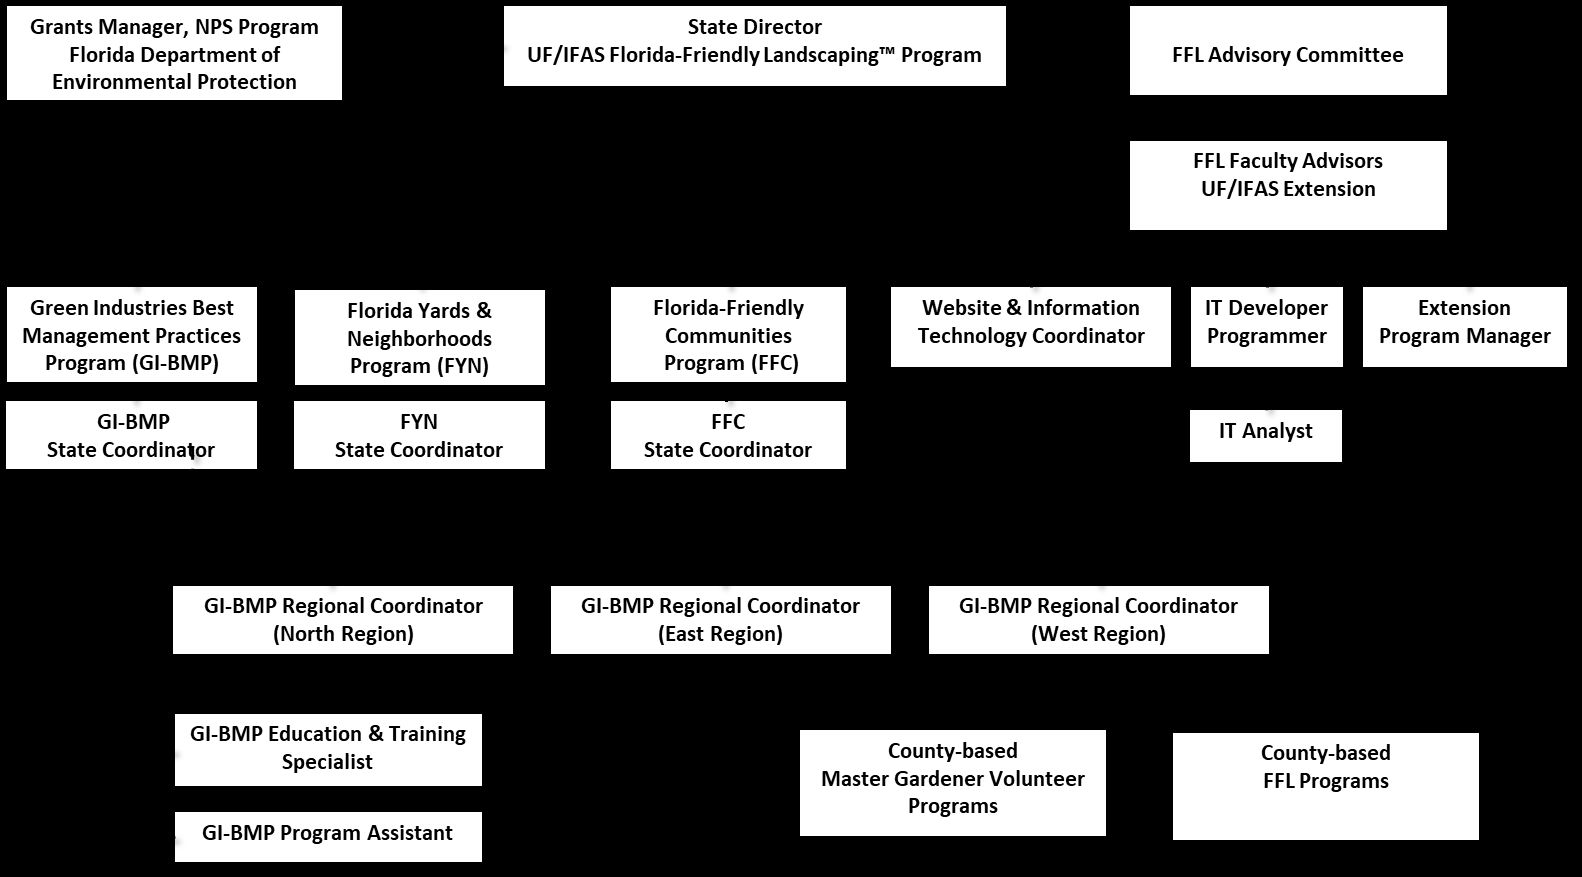 Organizational structure for FFL state office, University of Florida, Gainesville.